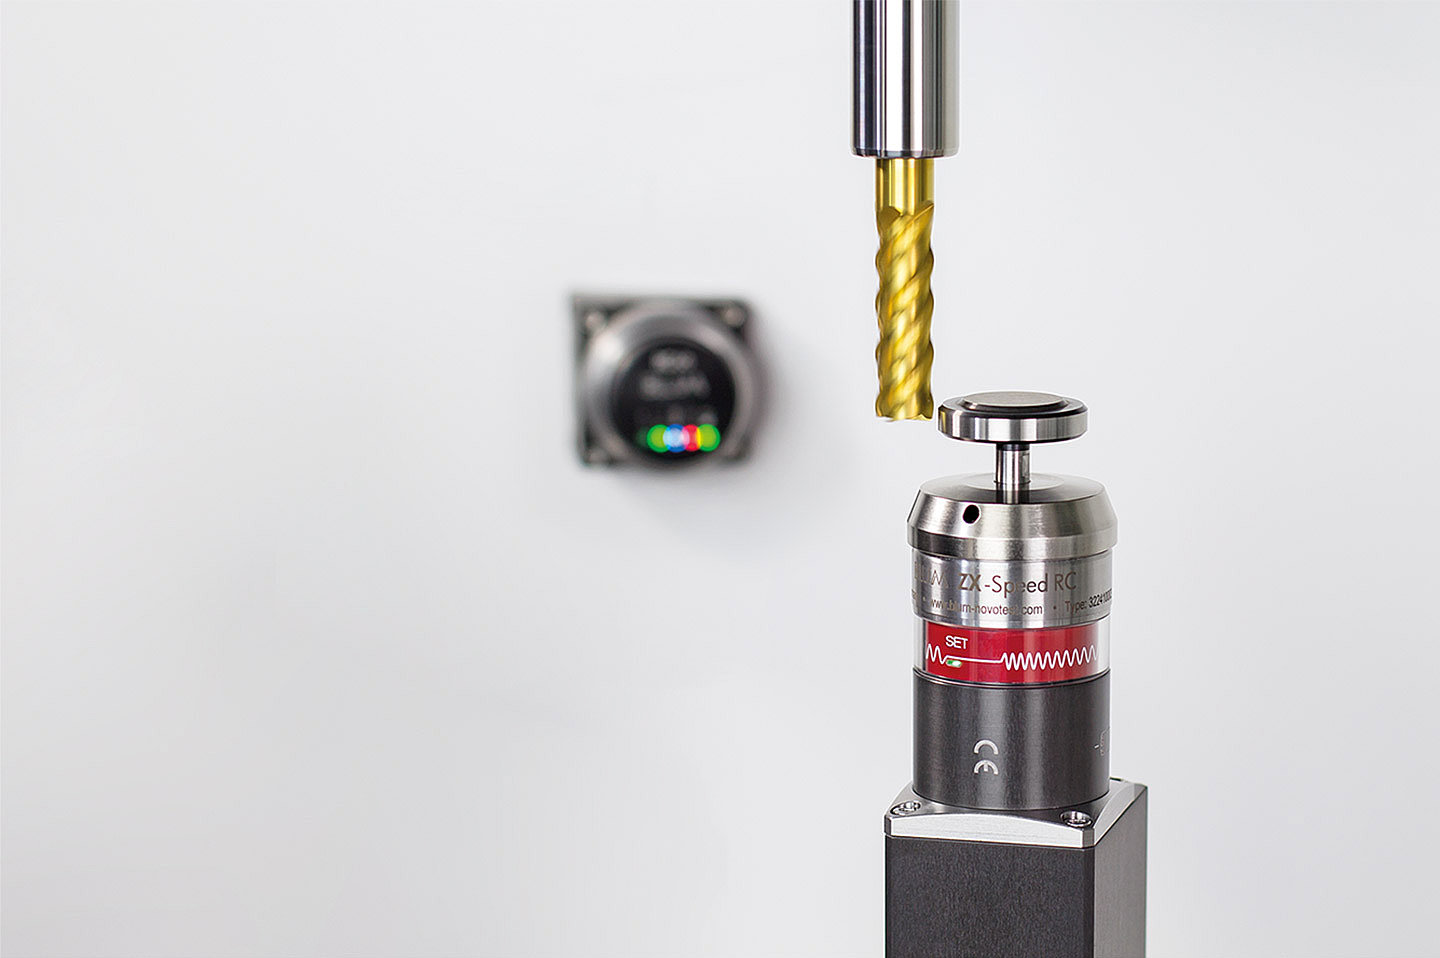 Tool measurement on a drill bit using the ZX Speed tool measuring probe